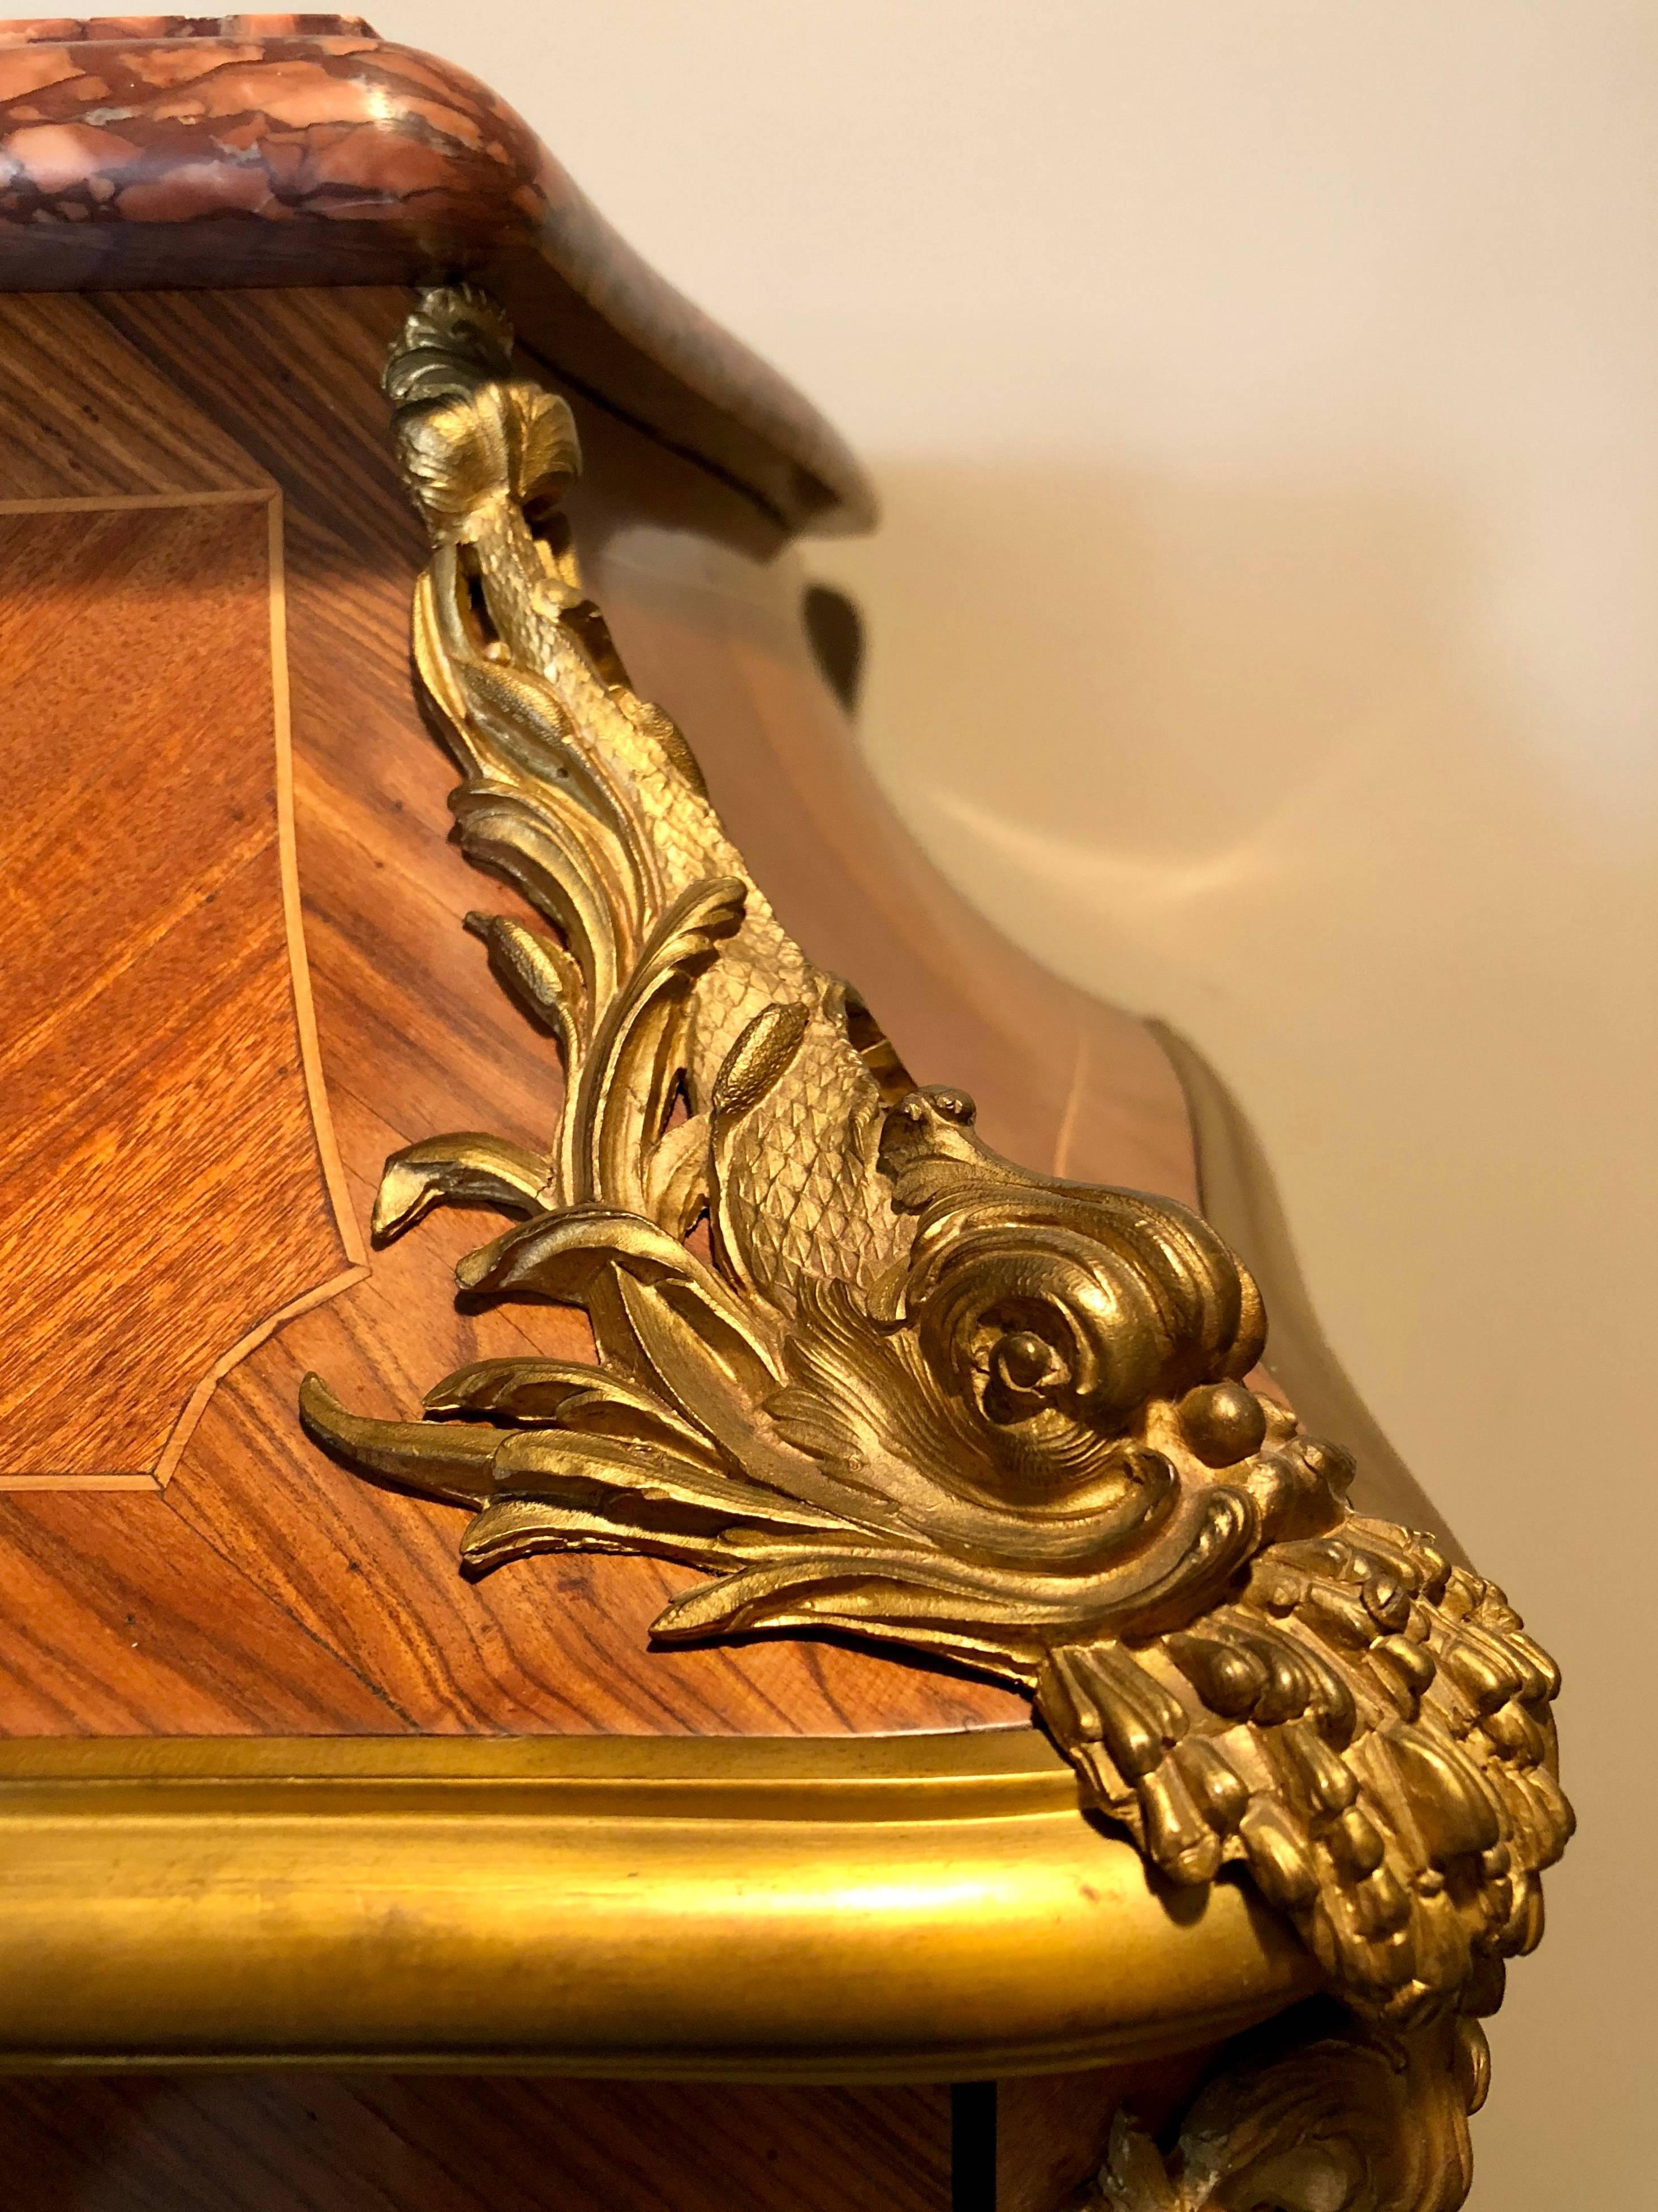 A very fine French ormolu-mounted kingwood, bois satine and tulipwood bibliotheque, early Louis XV style, by Francois Linke.
Signed: F. Linke
Having the original marble of Aleppo Breccia in France, and the center with beautiful gilt bronze